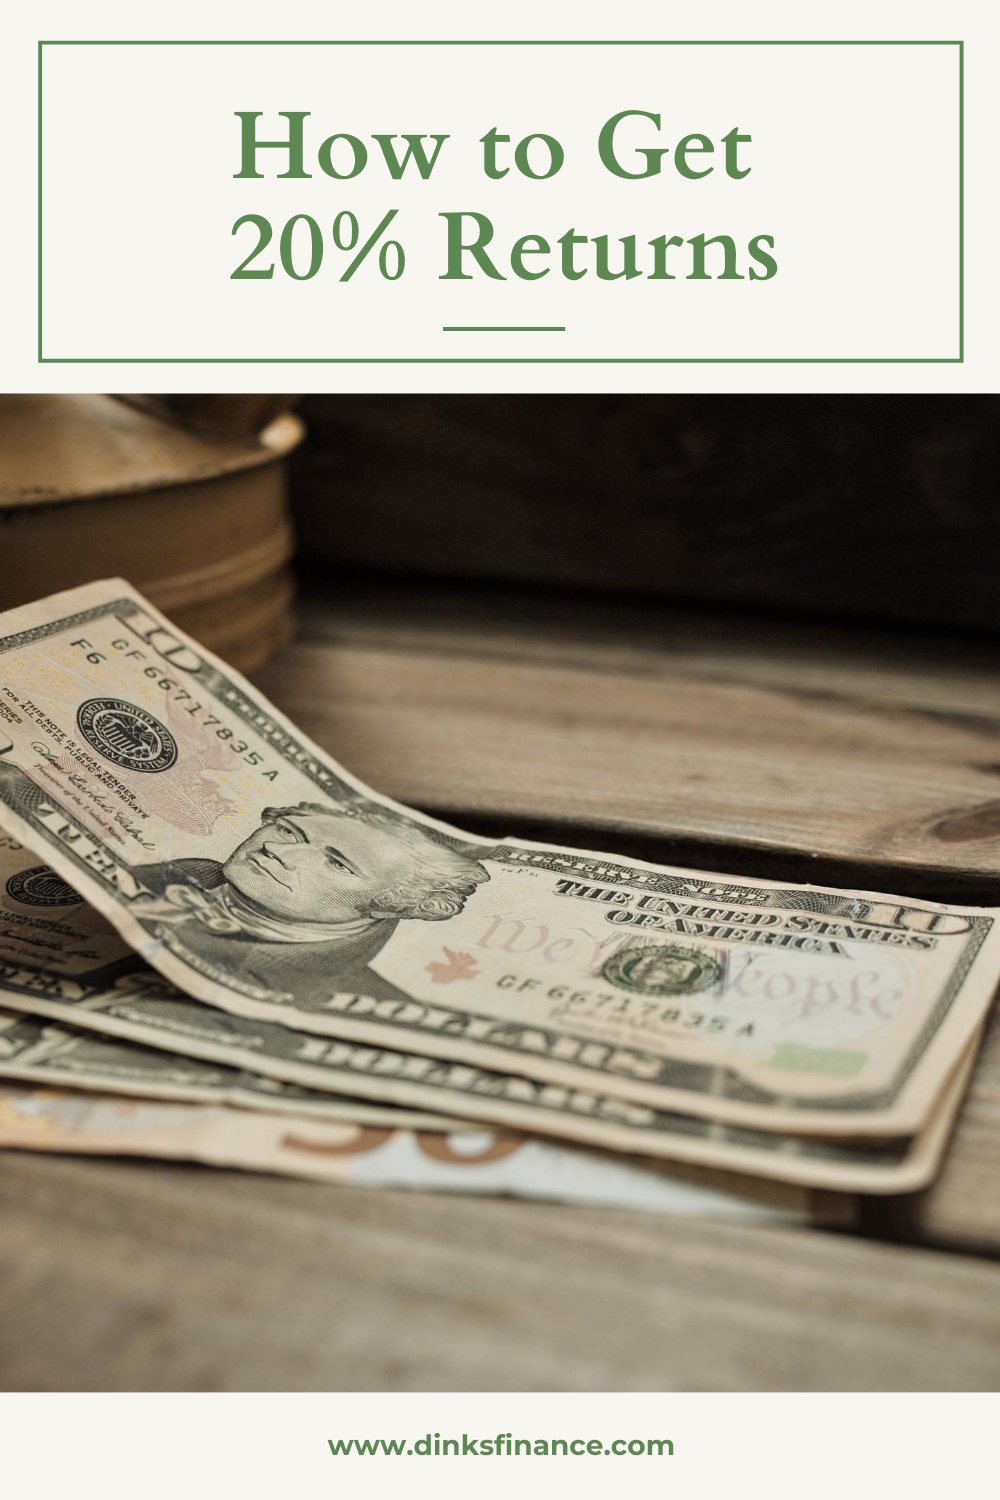 How To Get 20% Returns